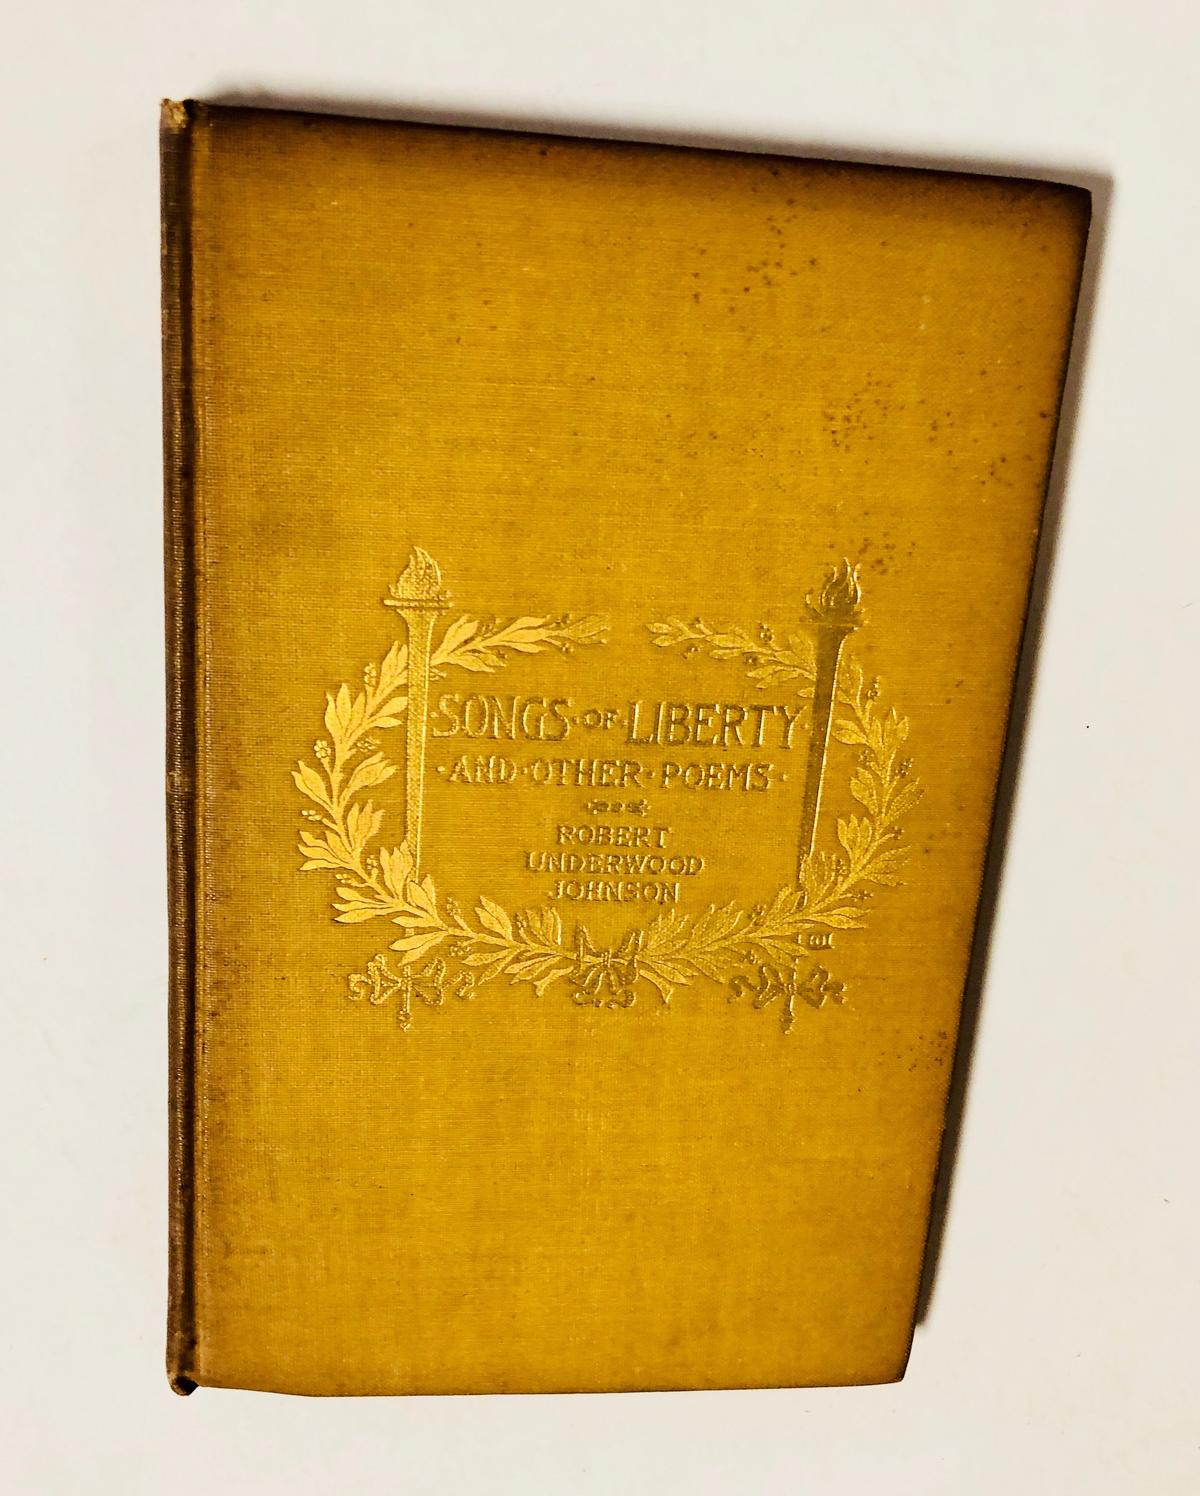 SONGS OF LIBERTY and Other Poems by Robert Underwood Johnson (1897) SIGNED